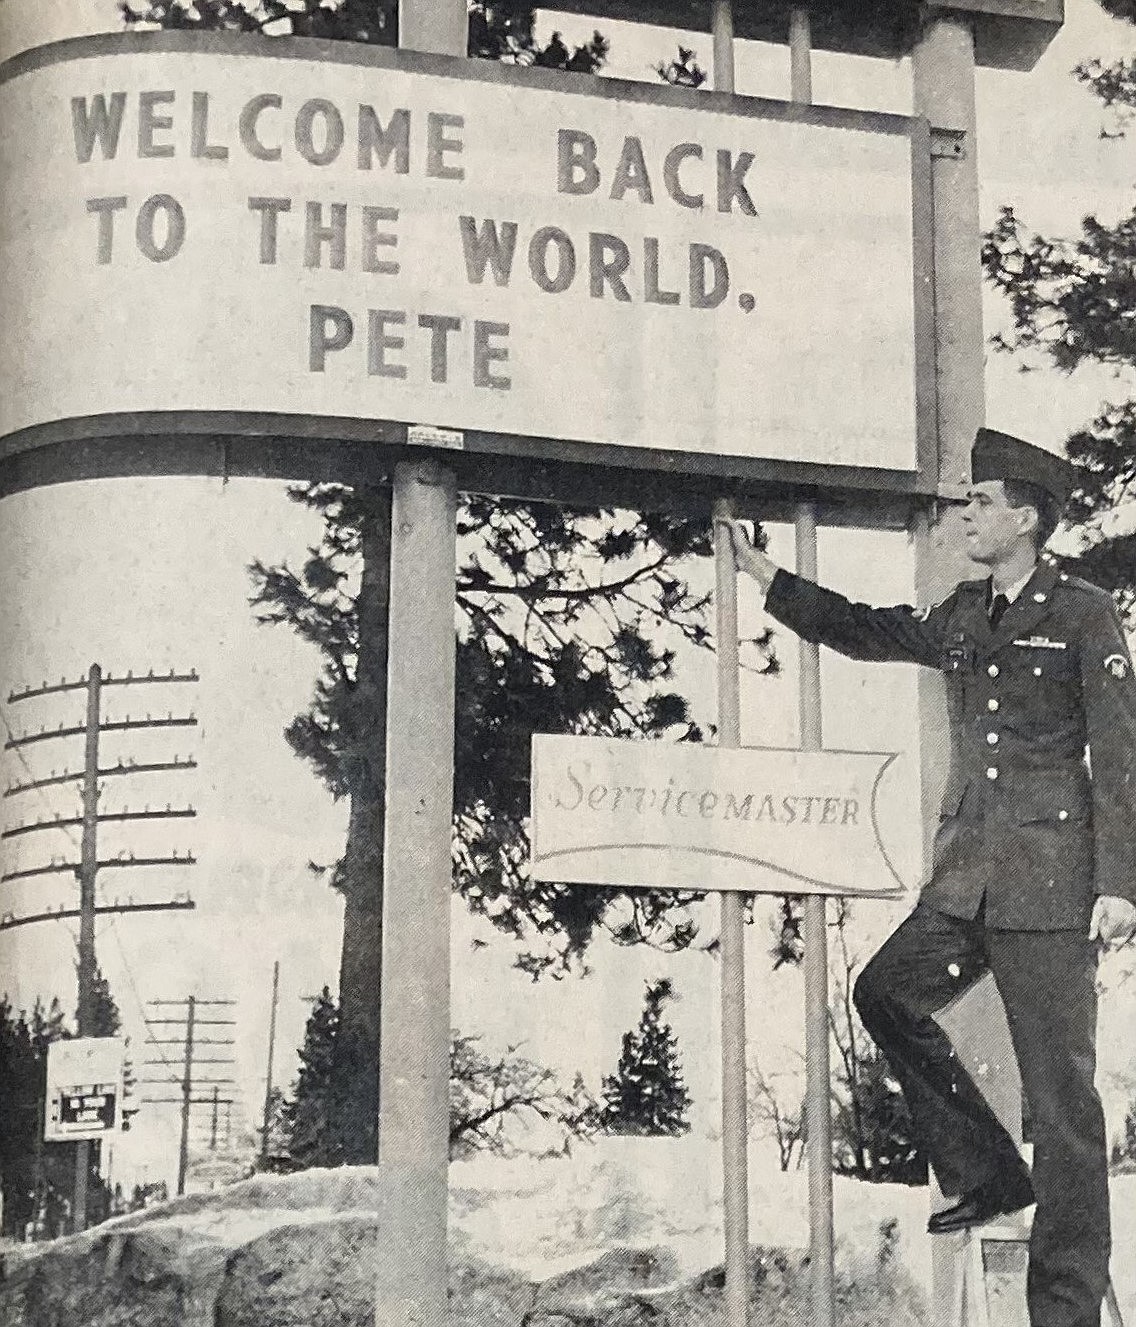 SP5 Pete Shepperd was welcomed back to Coeur d’Alene after a year in Vietnam.